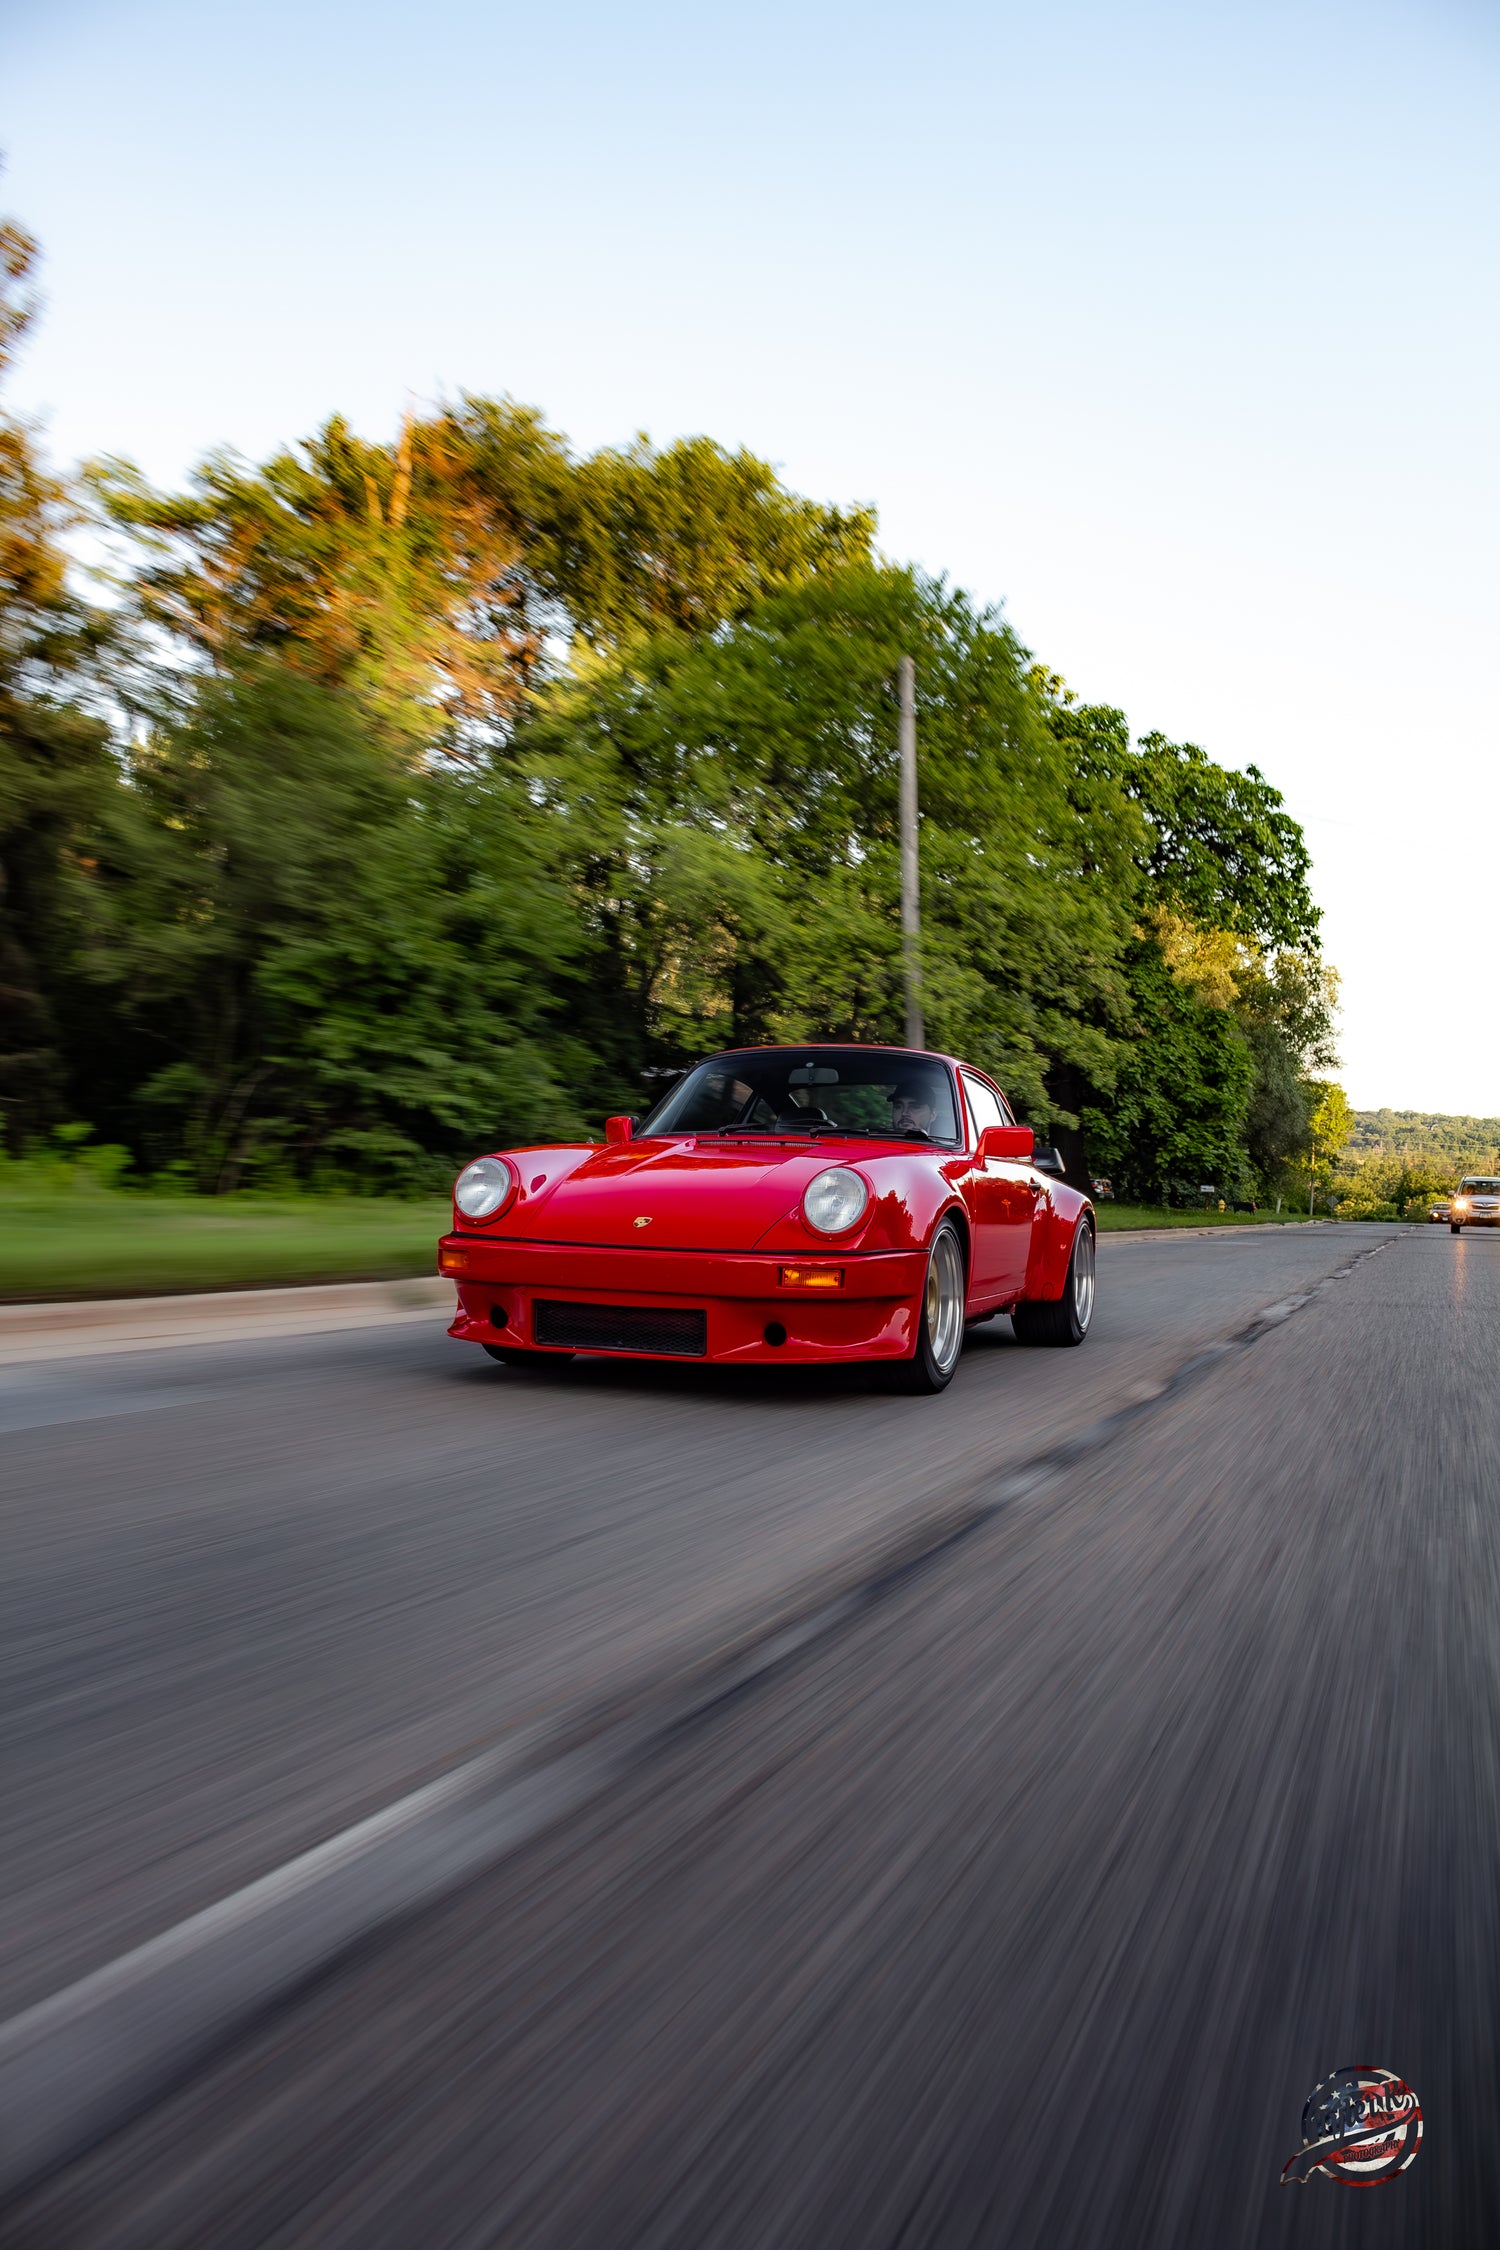 Red Porsche driving on a road 